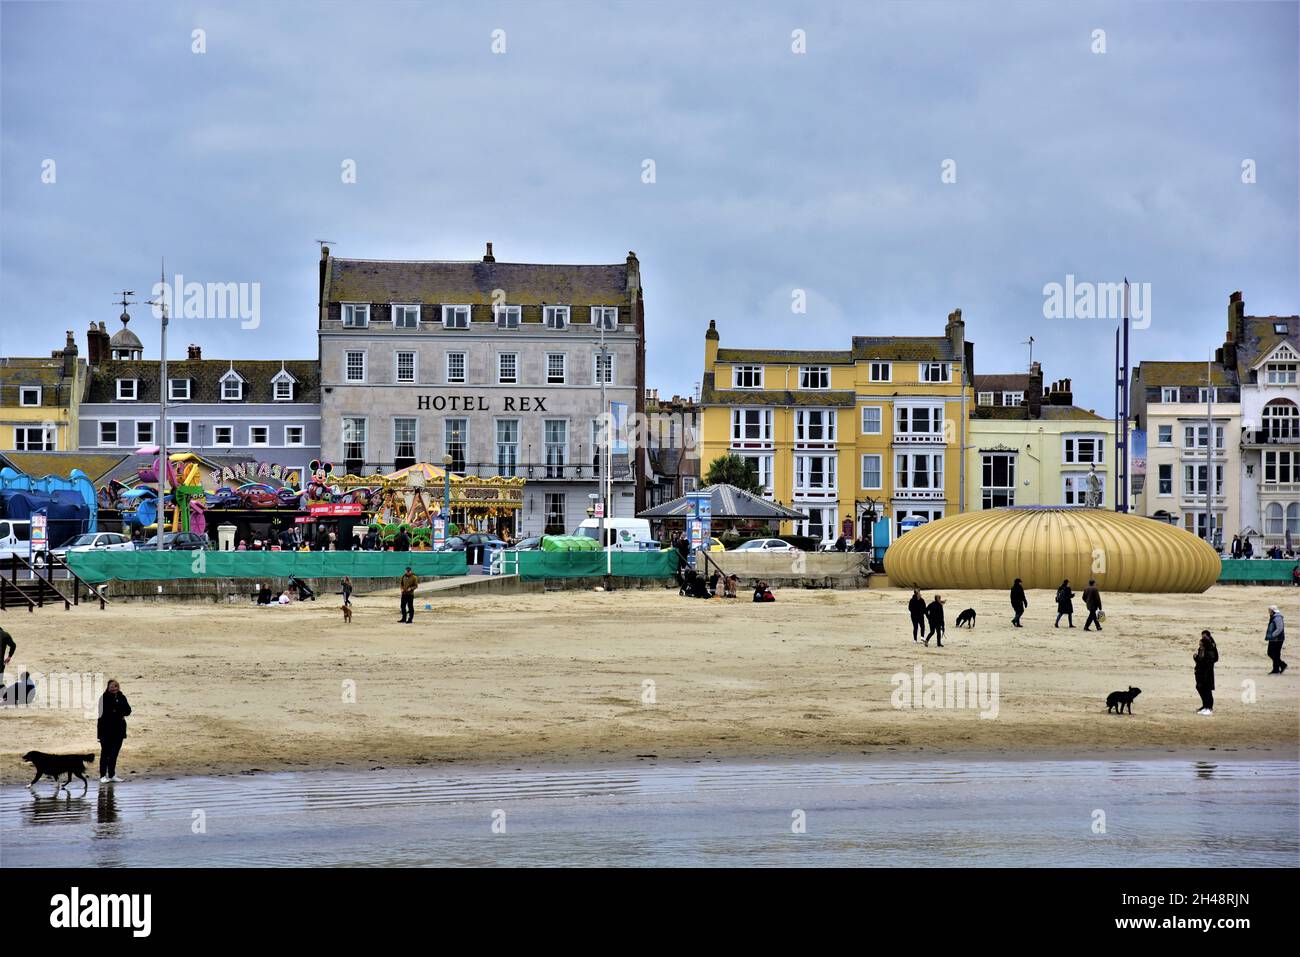 Weymouth a seaside town on the English channel coast , England, the third largest settlement in Dorset. Pictures taken October 2021 Stock Photo